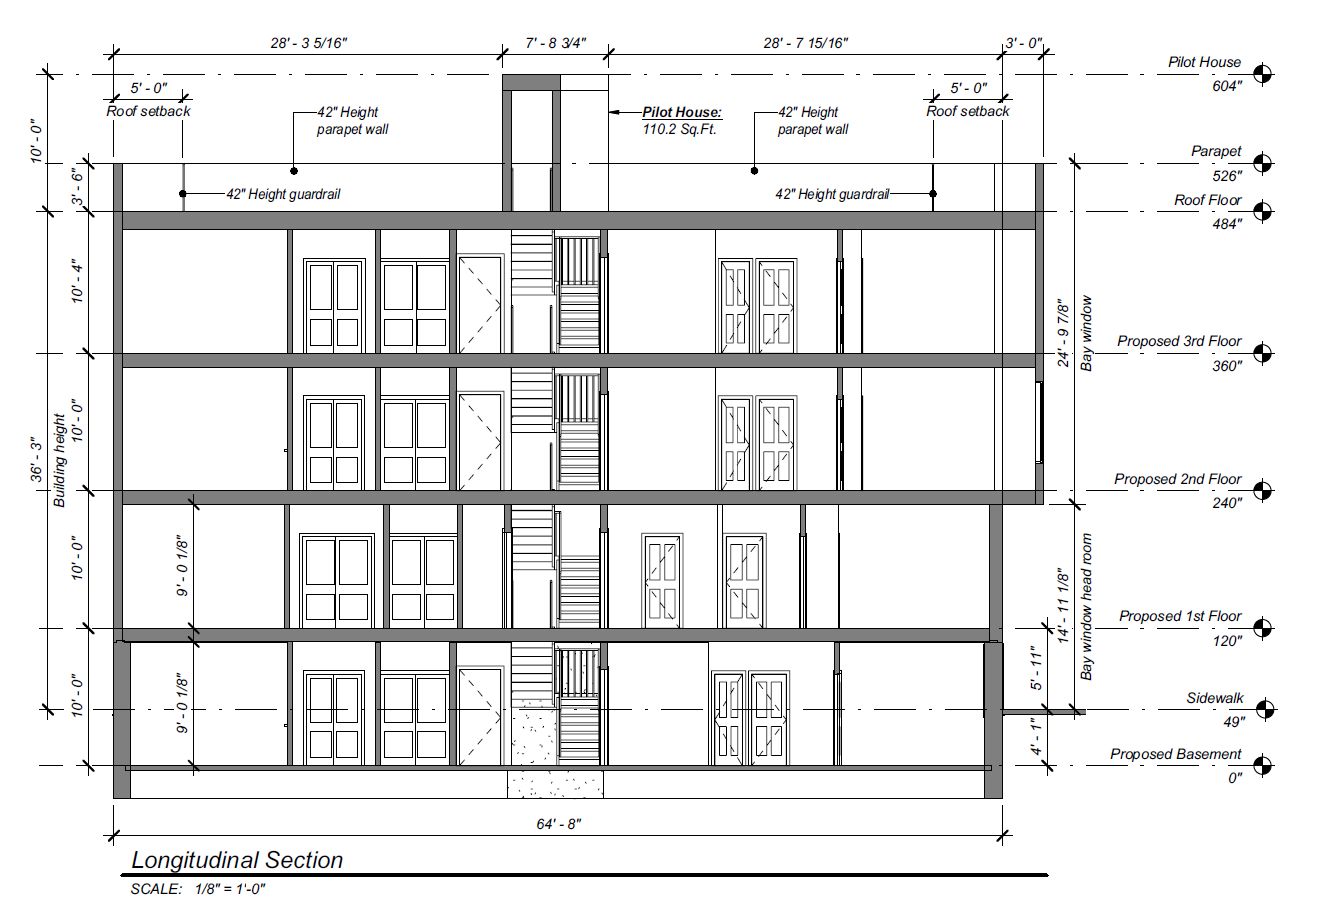 715 West Cumberland Street. Building section. Credit: Haverford Square Designs via the City of Philadelphia